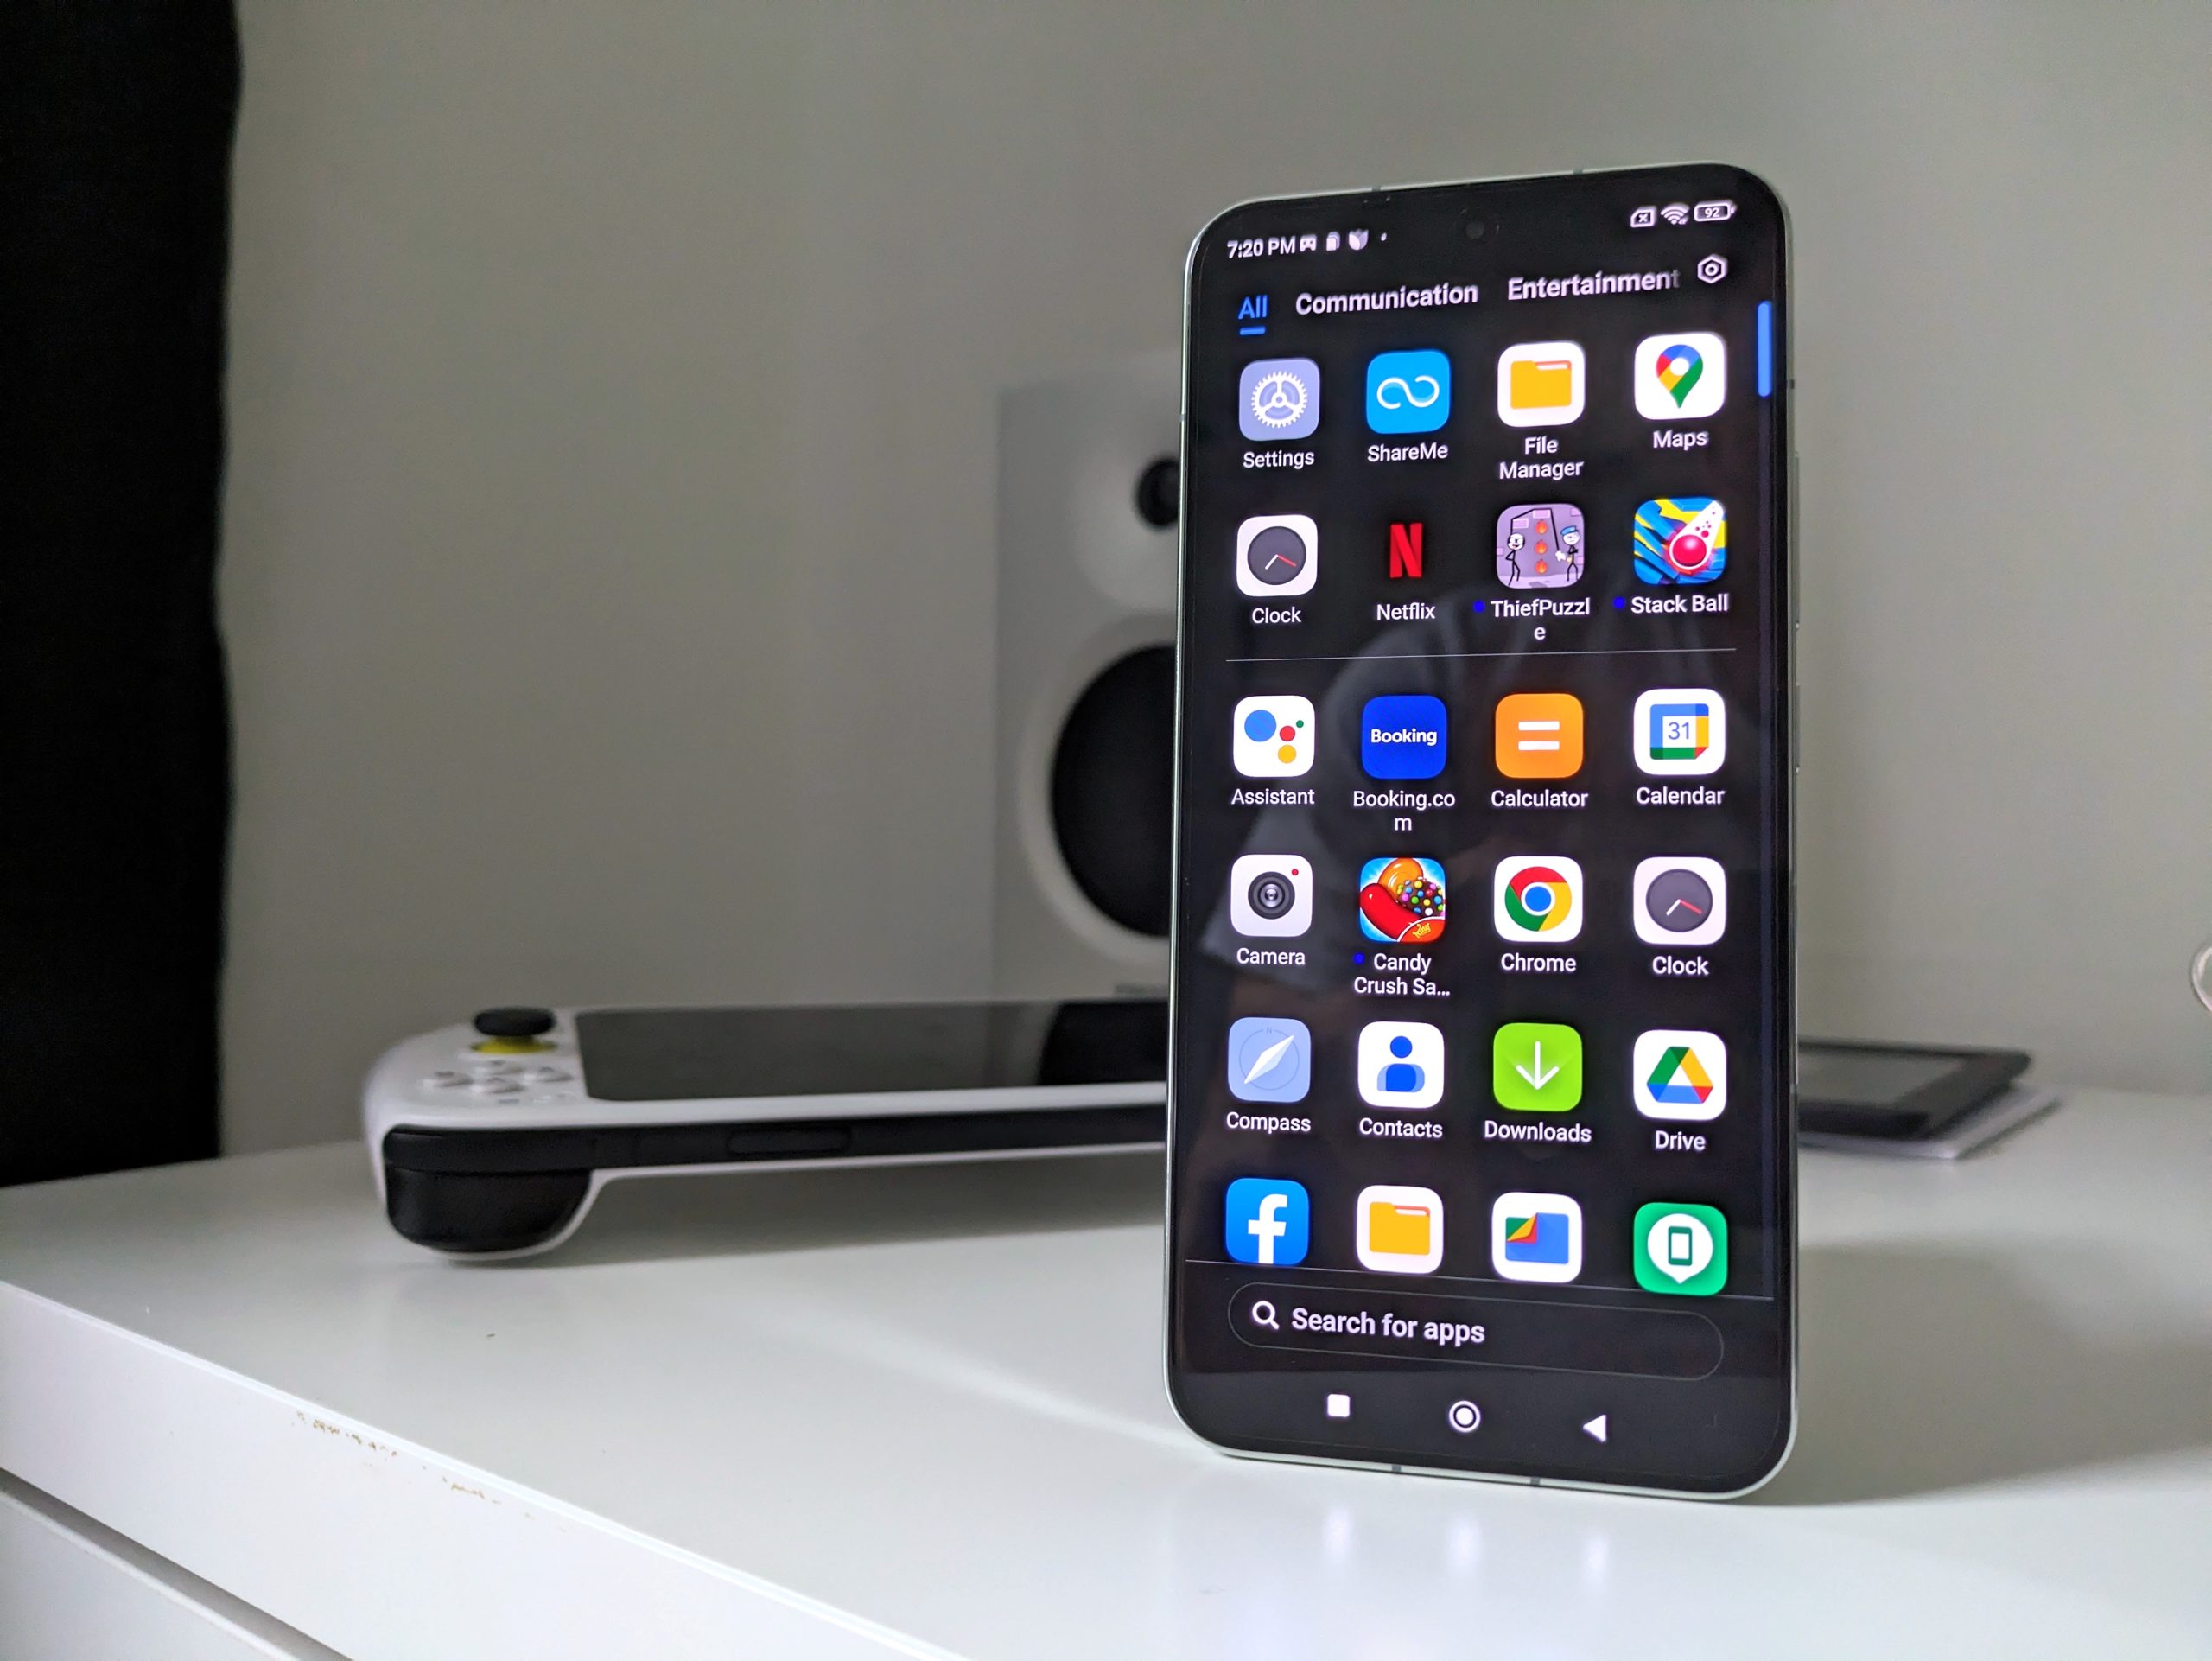 Xiaomi 14 Pro review - Leica camera smartphone with a great display leaves  some questions -  Reviews